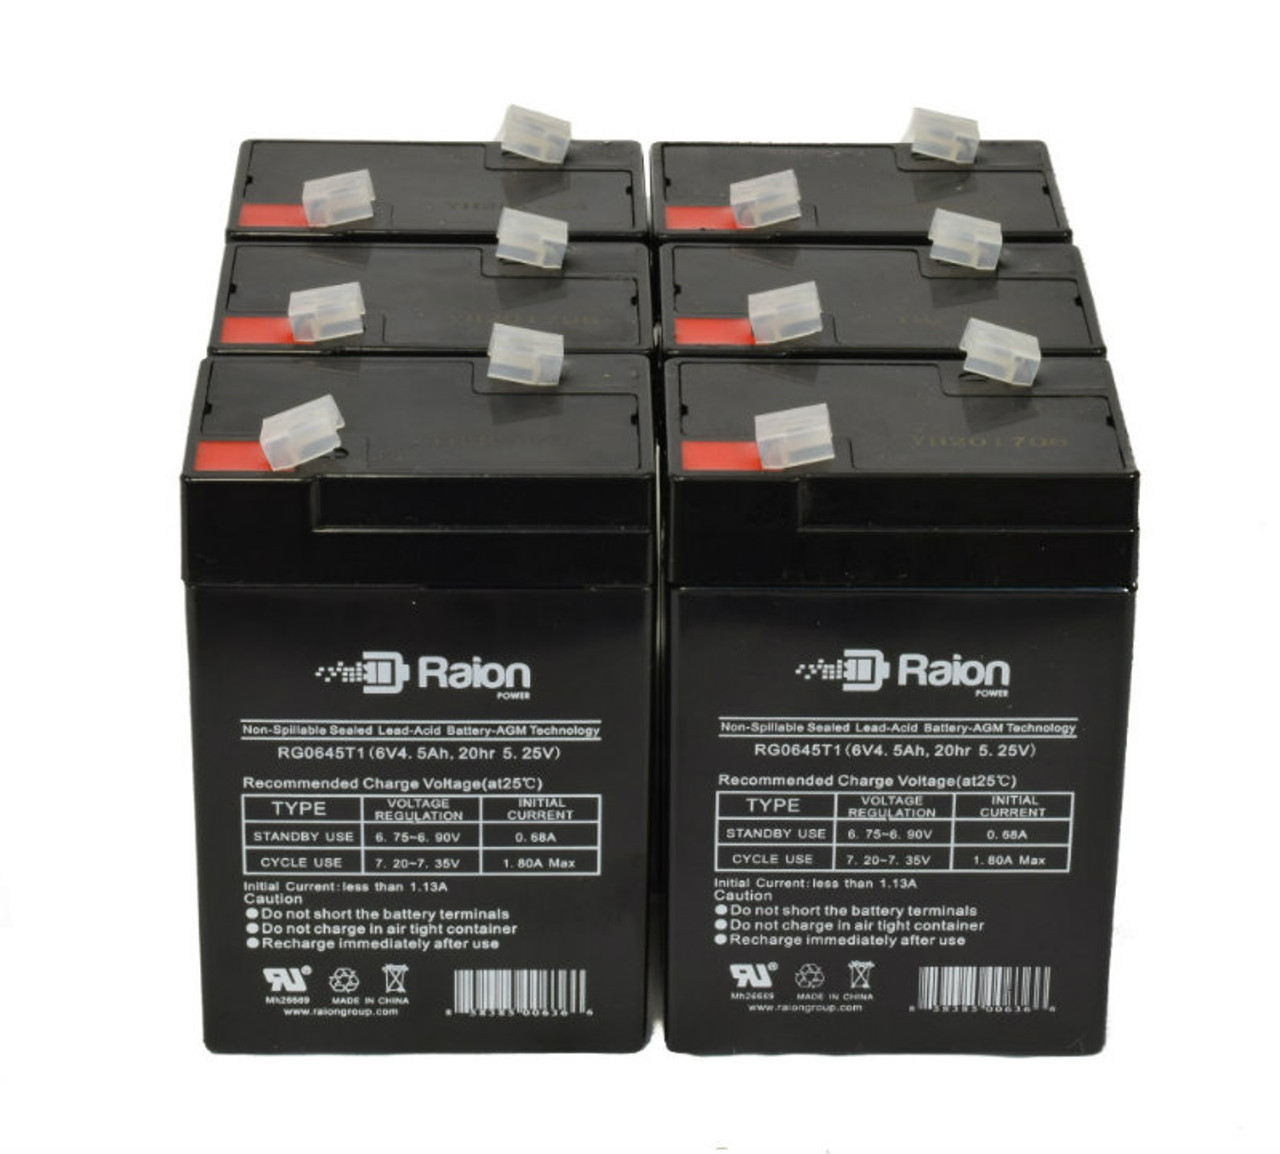 Raion Power 6V 4.5Ah Replacement Emergency Light Battery for High-Lites 39-01 - 6 Pack